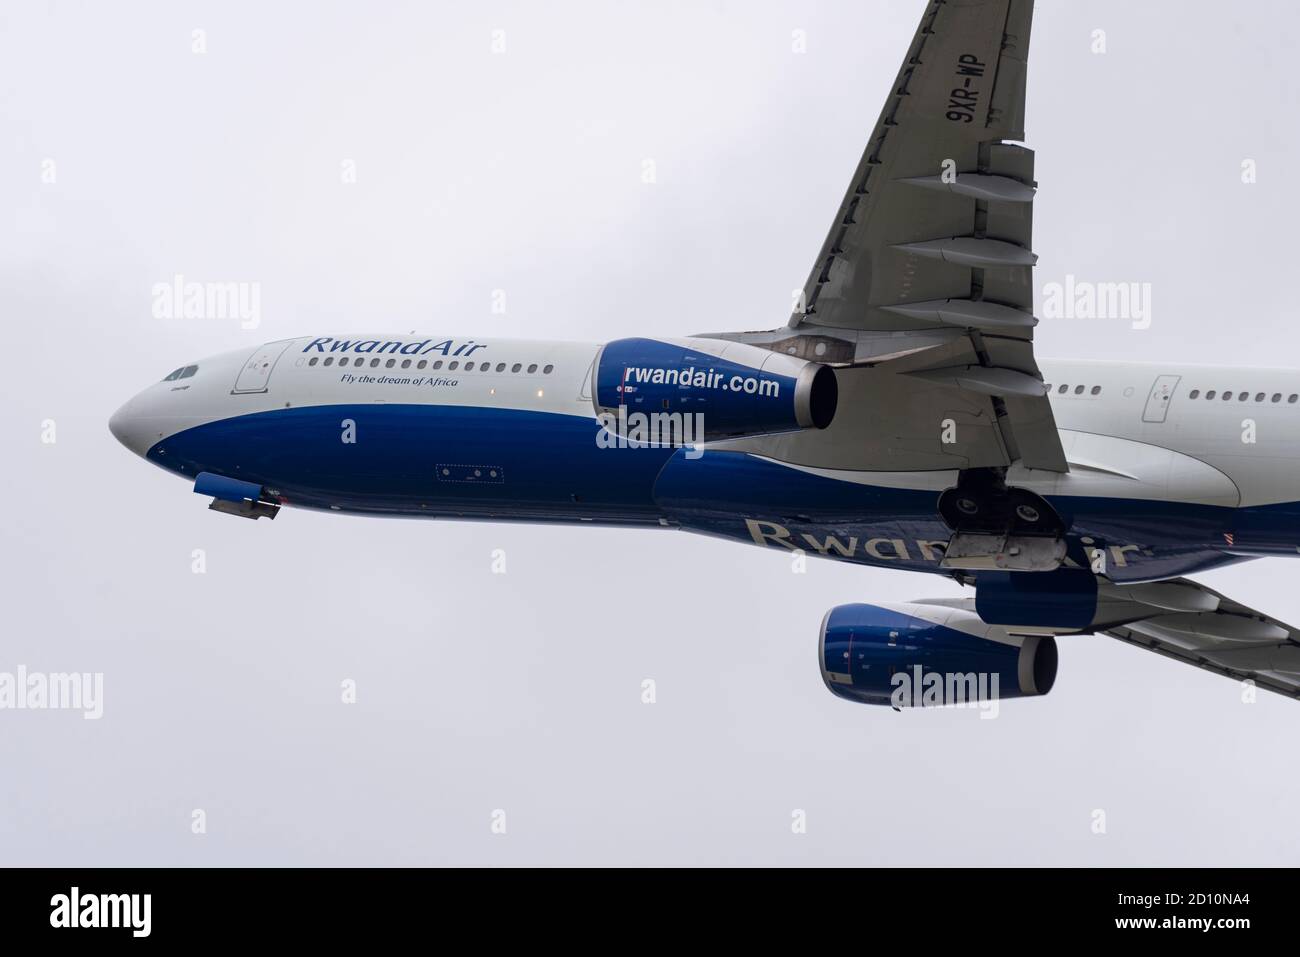 Rwandair Airbus A330 -300 jet airliner plane 9XR-WP taking off in bad weather from London Heathrow Airport, UK. Flag carrier airline of Rwanda Stock Photo